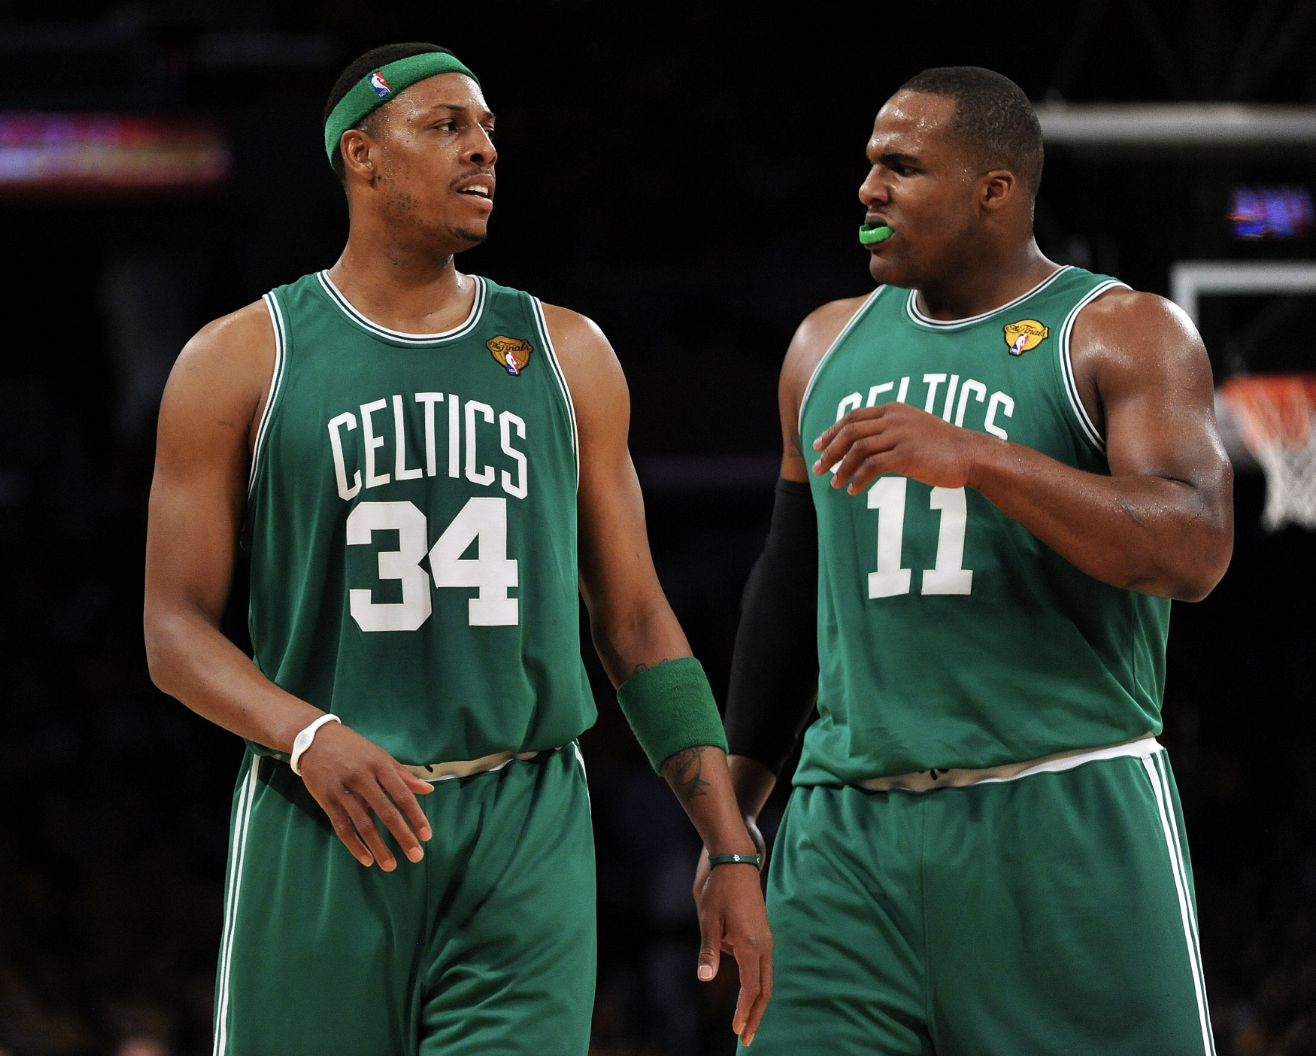 Paul Pierce and Glen Davis “guaranteed” a Boston Celtic title in 2010. Instead, they lost to the Lakers.